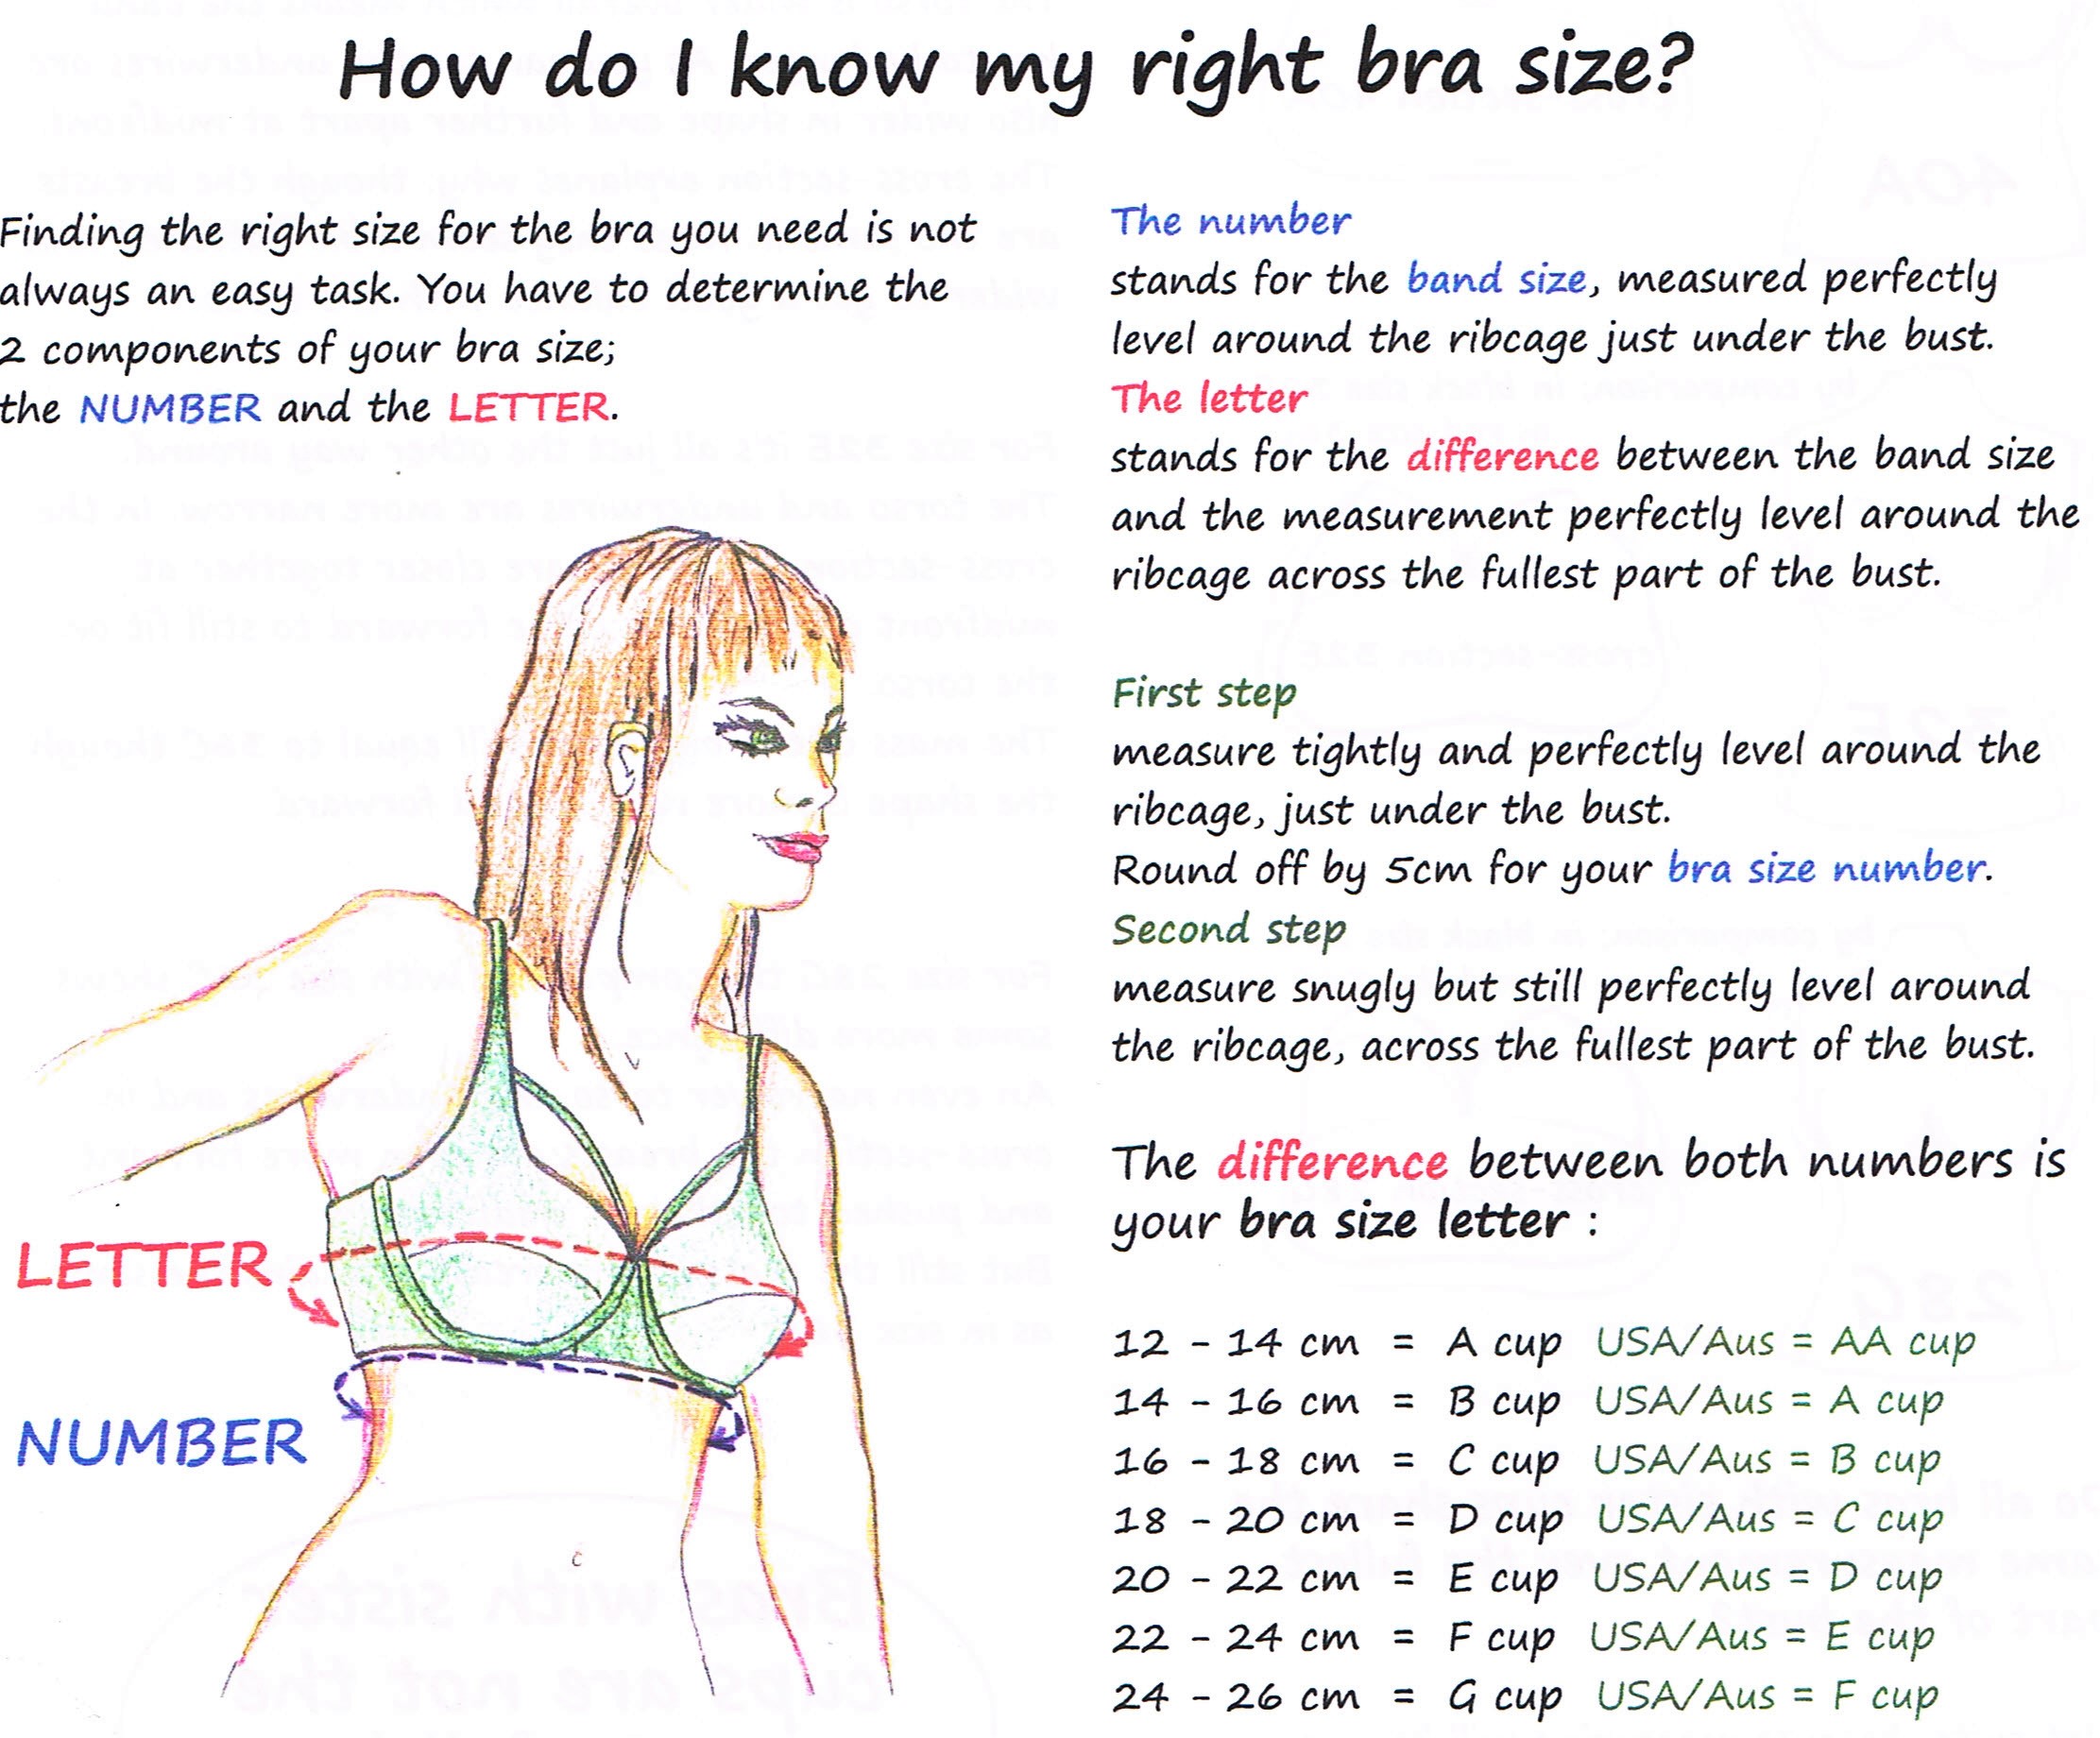 What are the different bra sizes? What does the number and letter